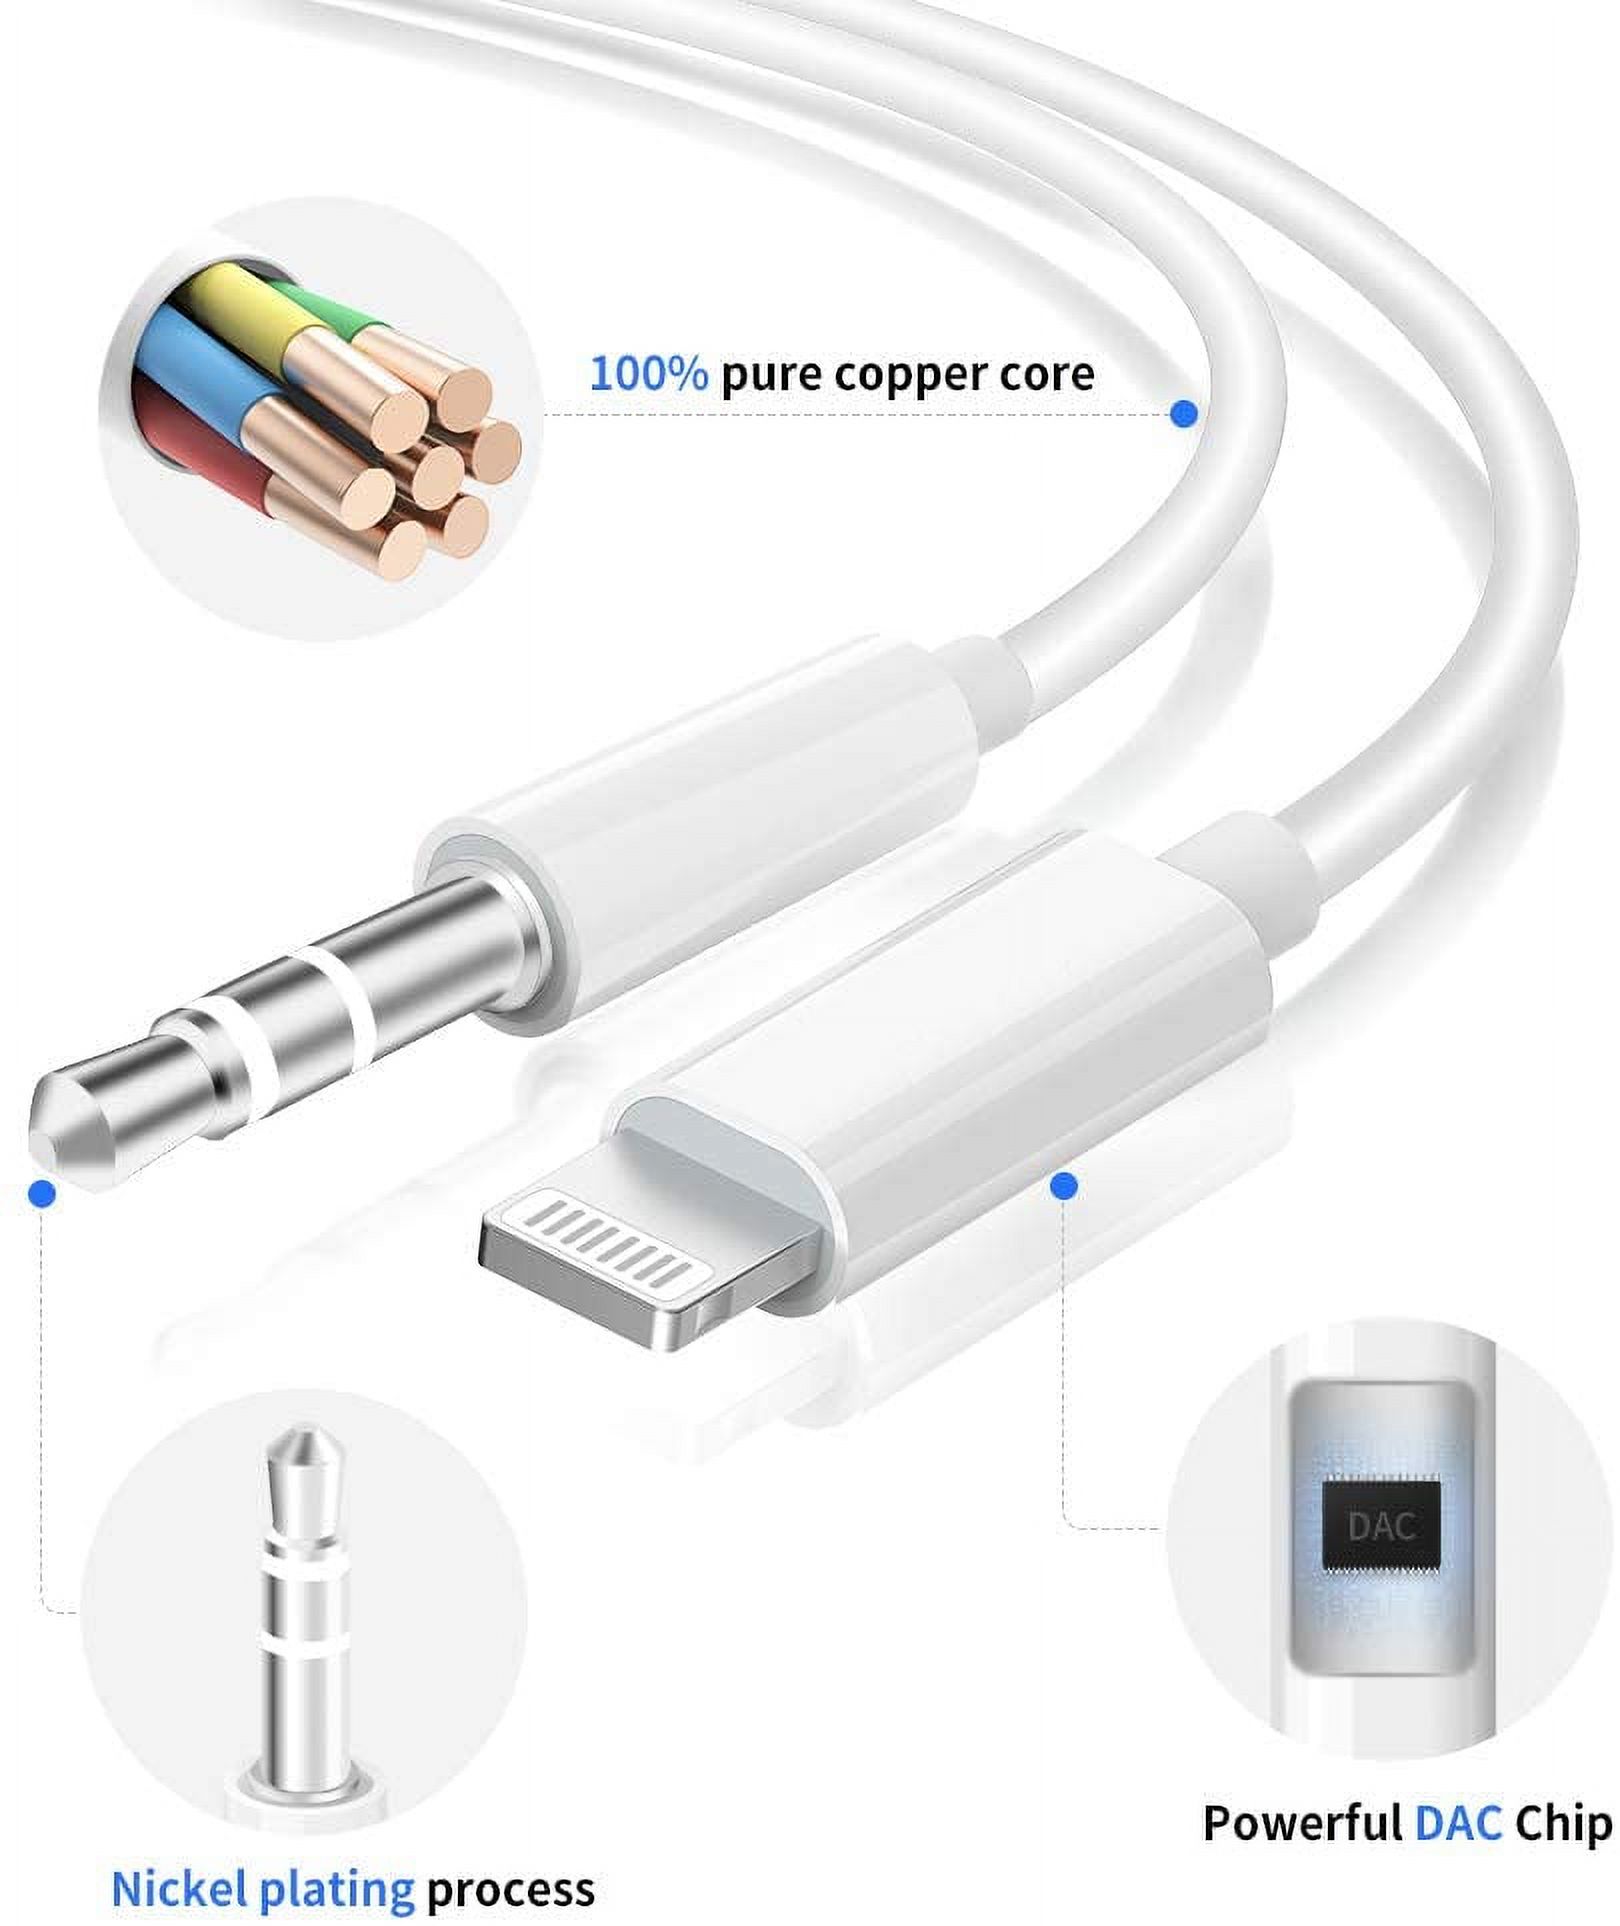 Aux Cord Compatible with iPhone,3.5mm Aux Cable for Car Compatible with iPhone 8/7/11/XS/XR/X/iPad/iPod for Car/Home Stereo, Speaker, Headphone, Support All iOS Version - 3.3ft White - image 2 of 7